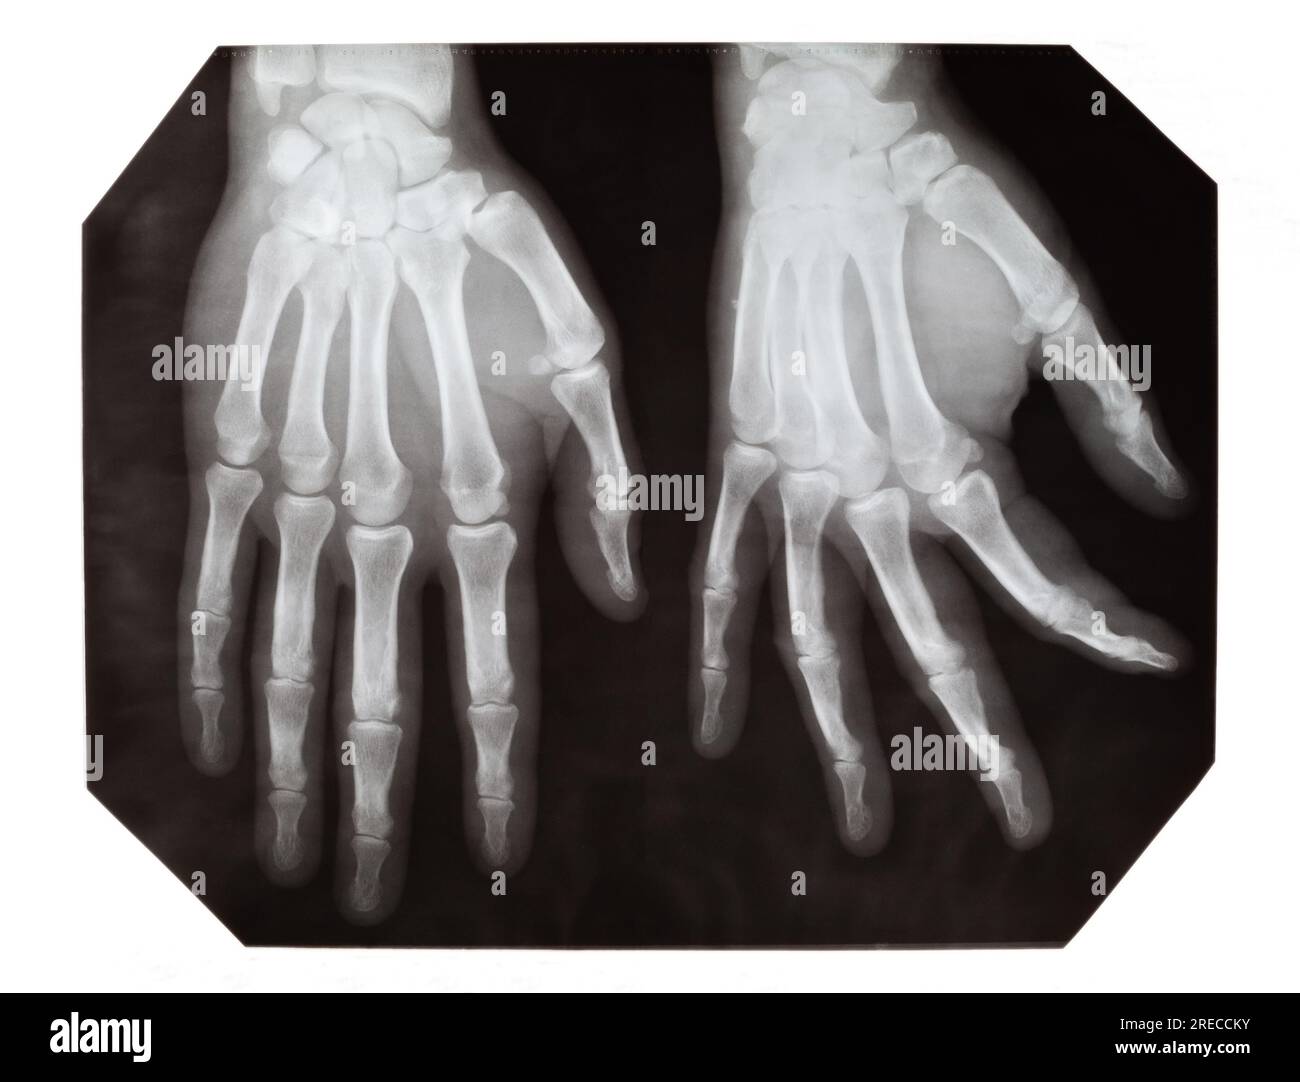 X-ray images of a hand with a fracture in different projections, on a white background Stock Photo